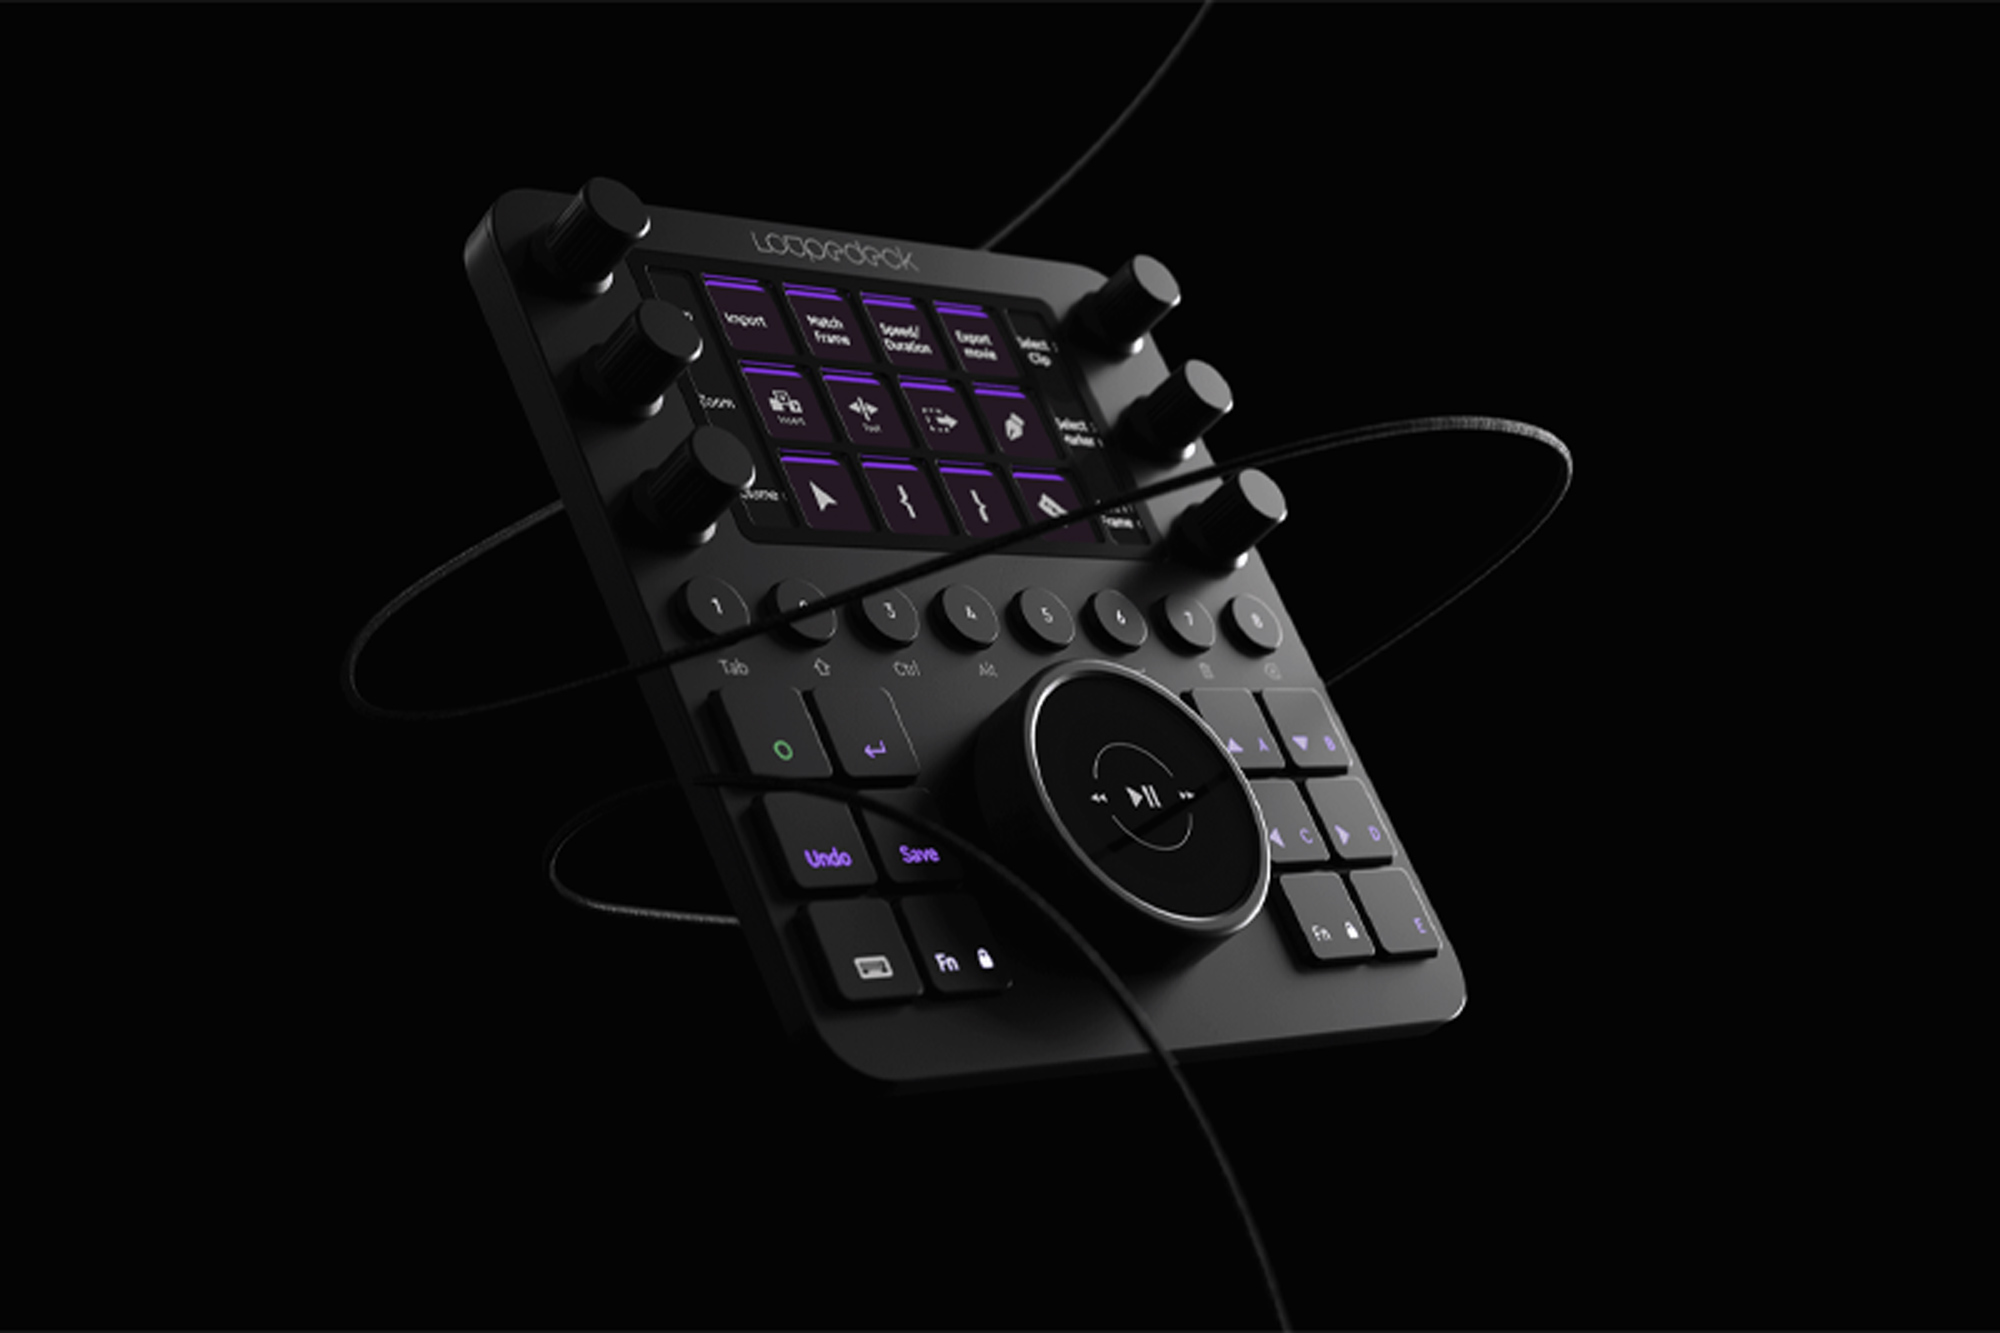 Loupedeck CT – A Hands On Review Of The New Creative Tool